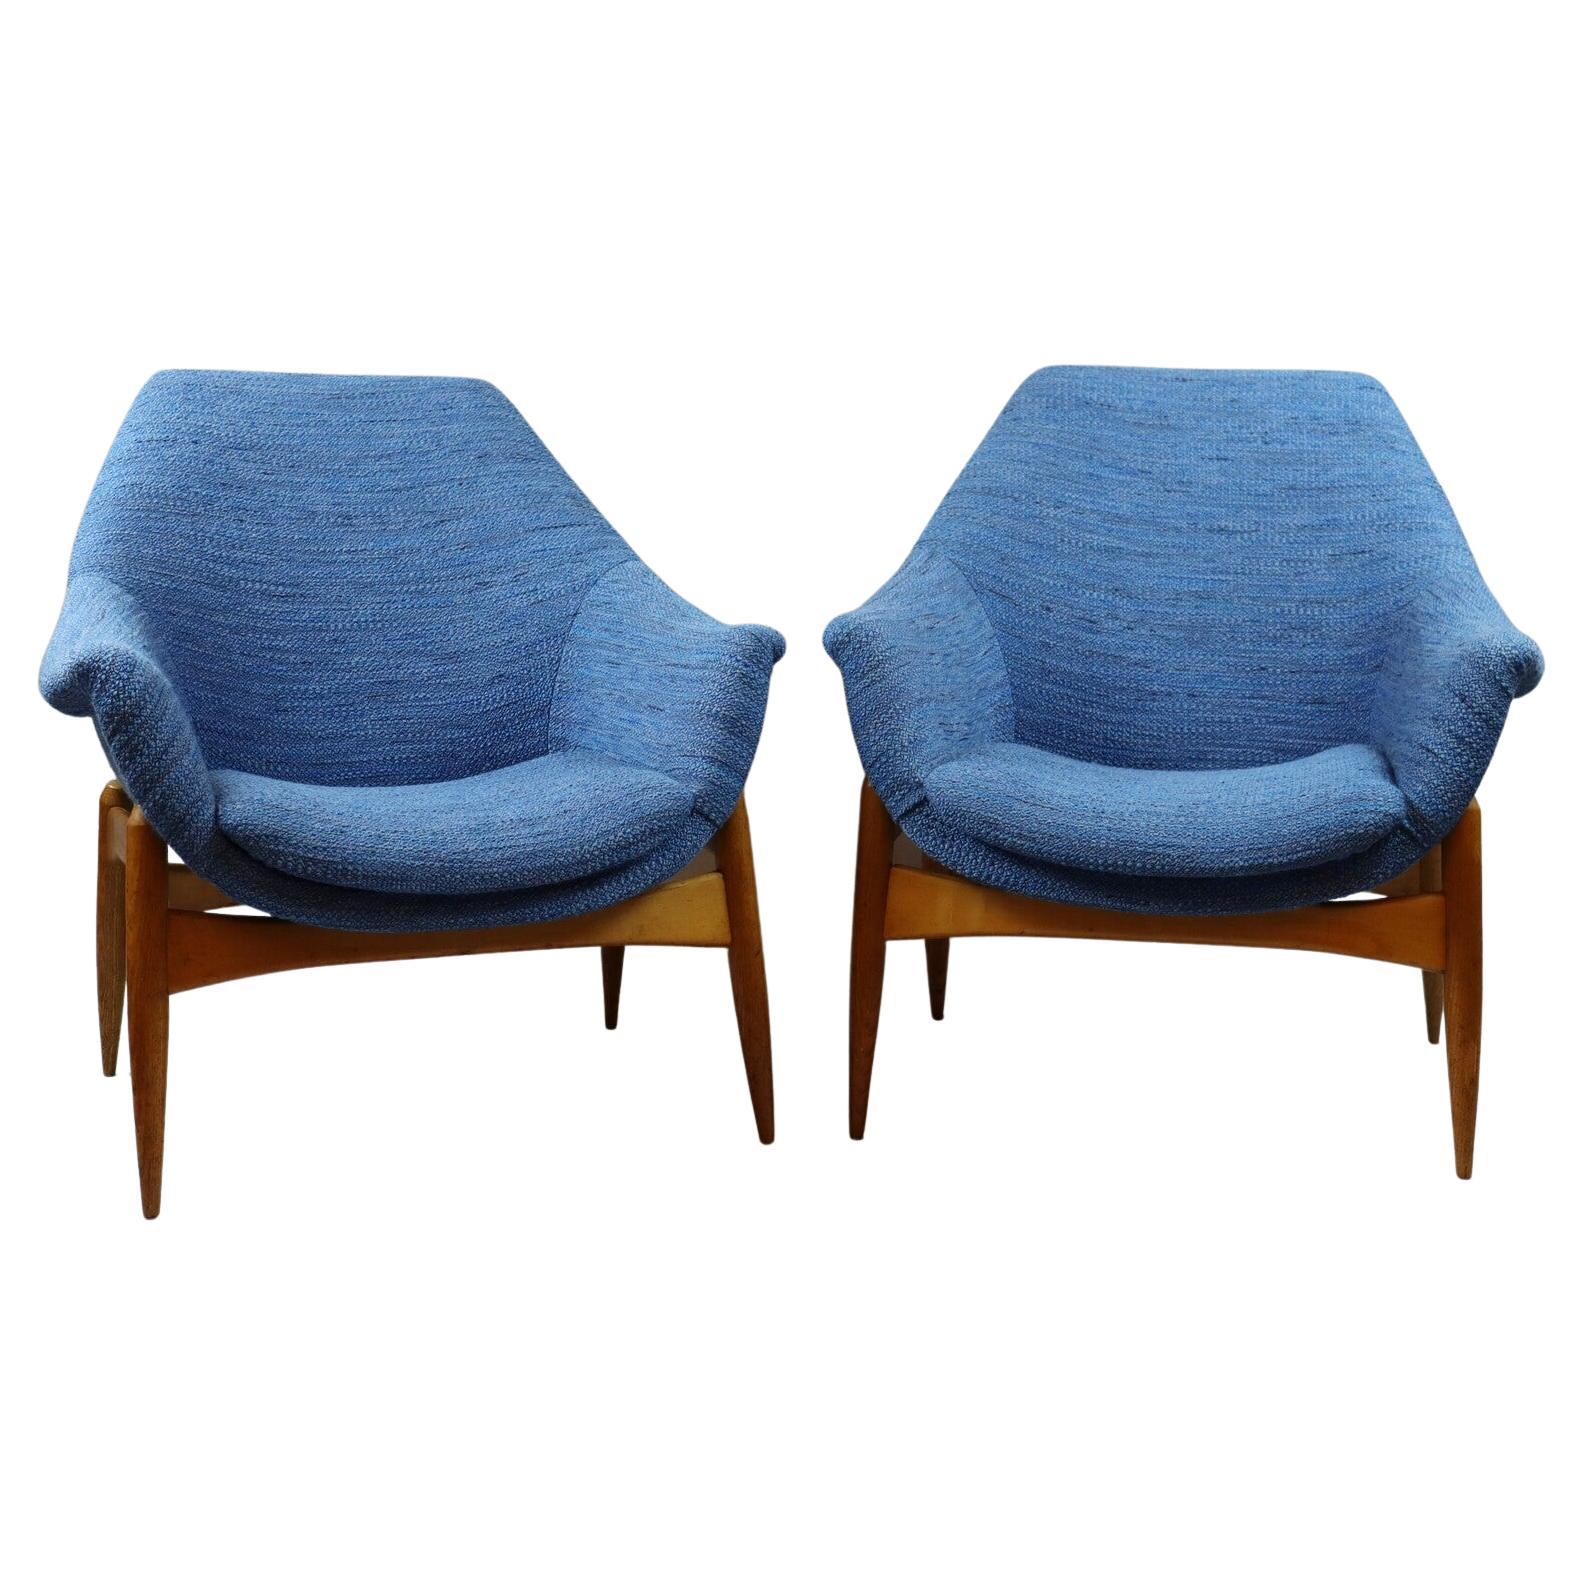 Mid-Century Pair of Blue Fabric Armchairs by Julia Gaubek, Hungary, 1950s For Sale